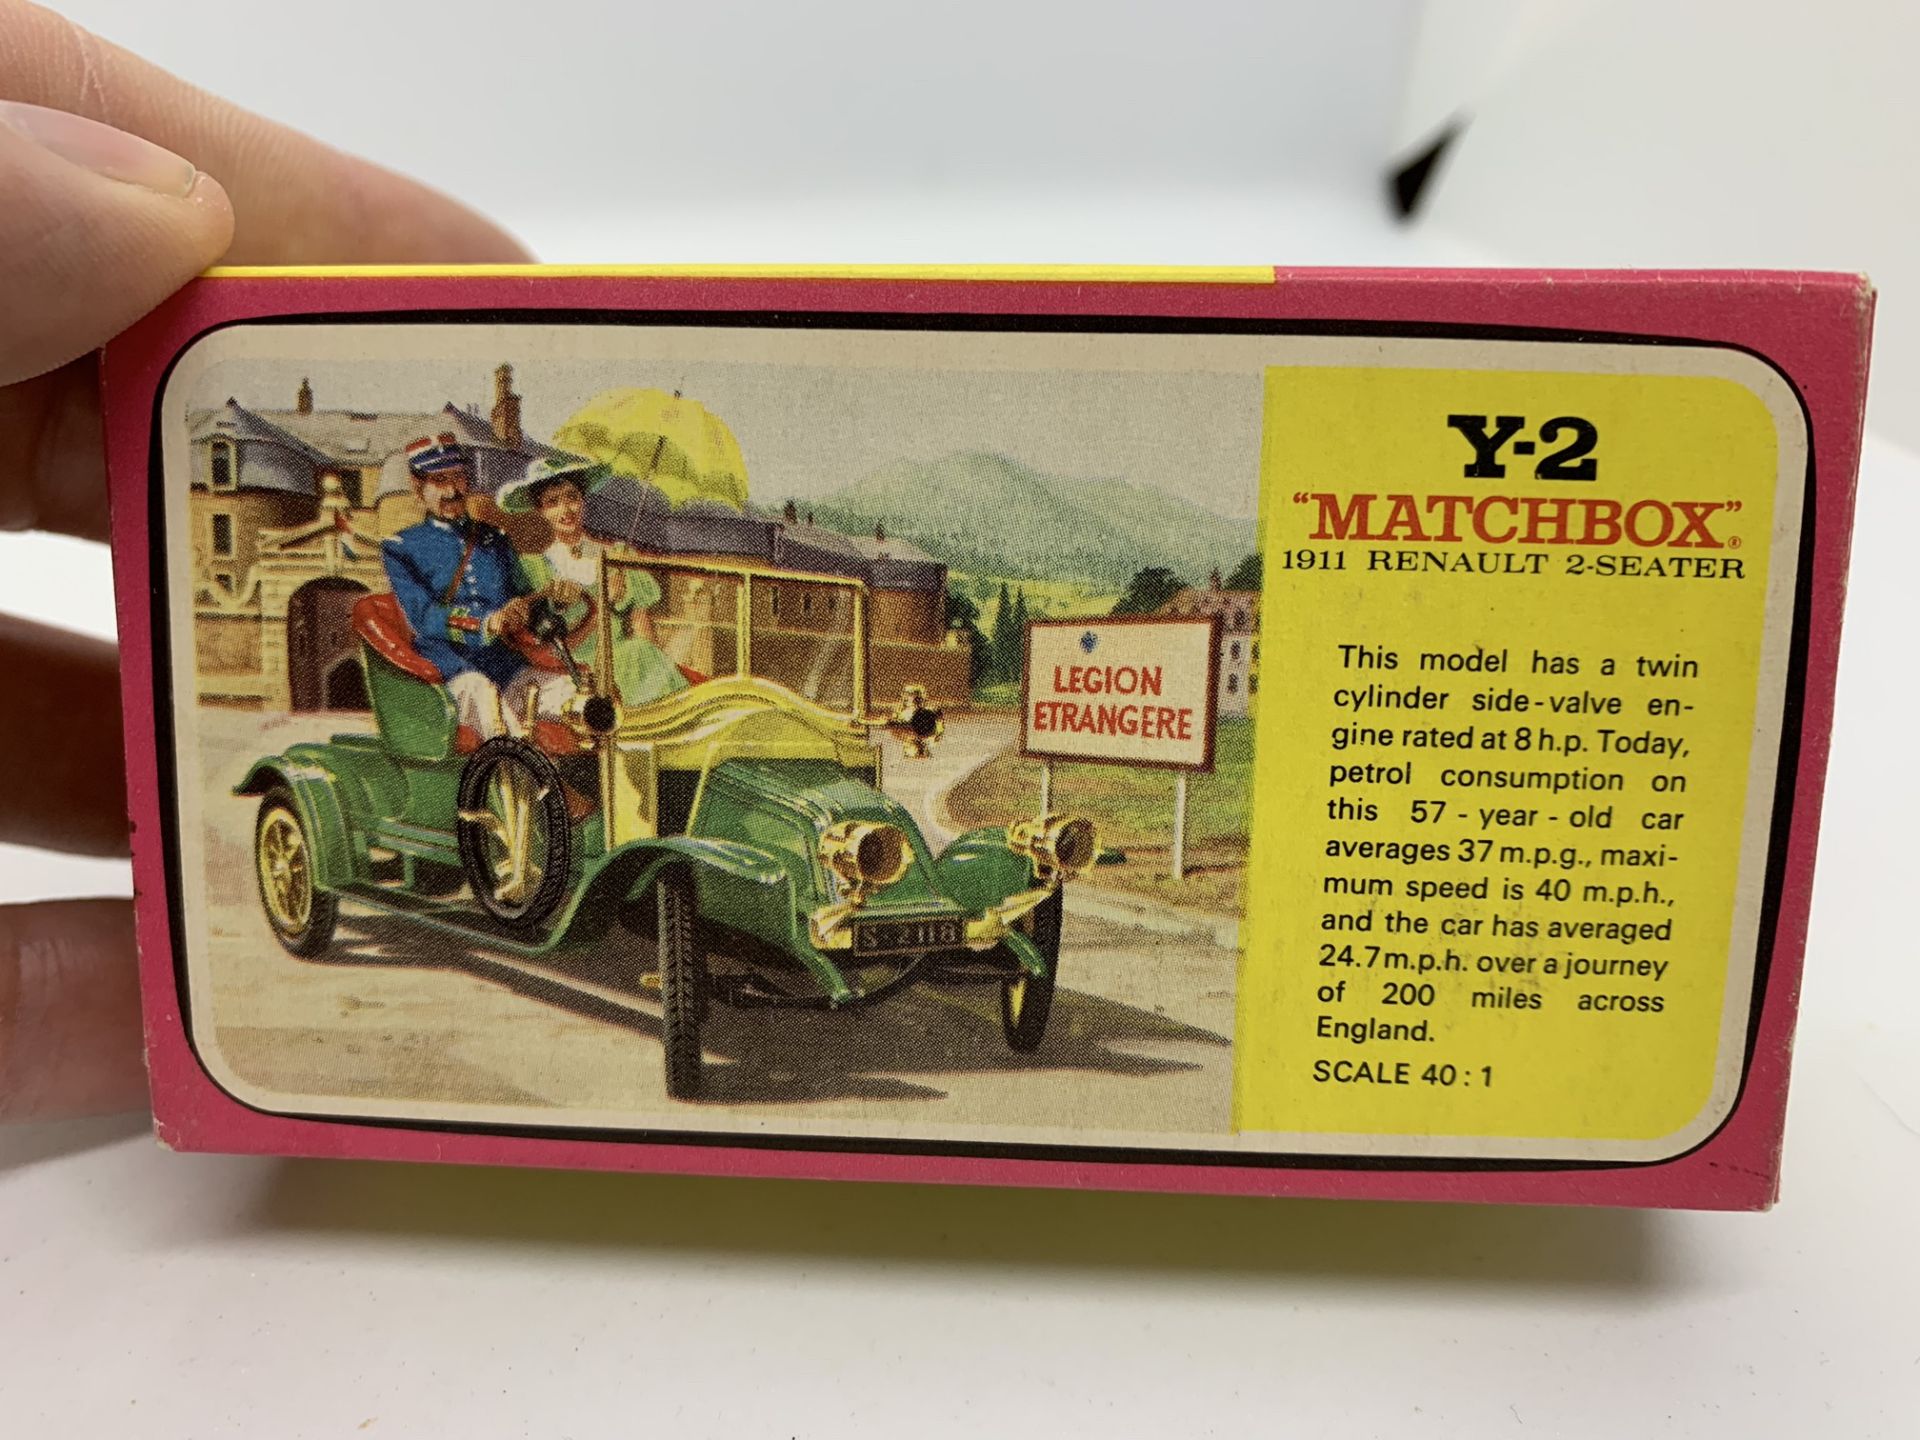 BOXED MATCHBOX Y2 1911 RENAULT 2 SEATER - Image 2 of 2